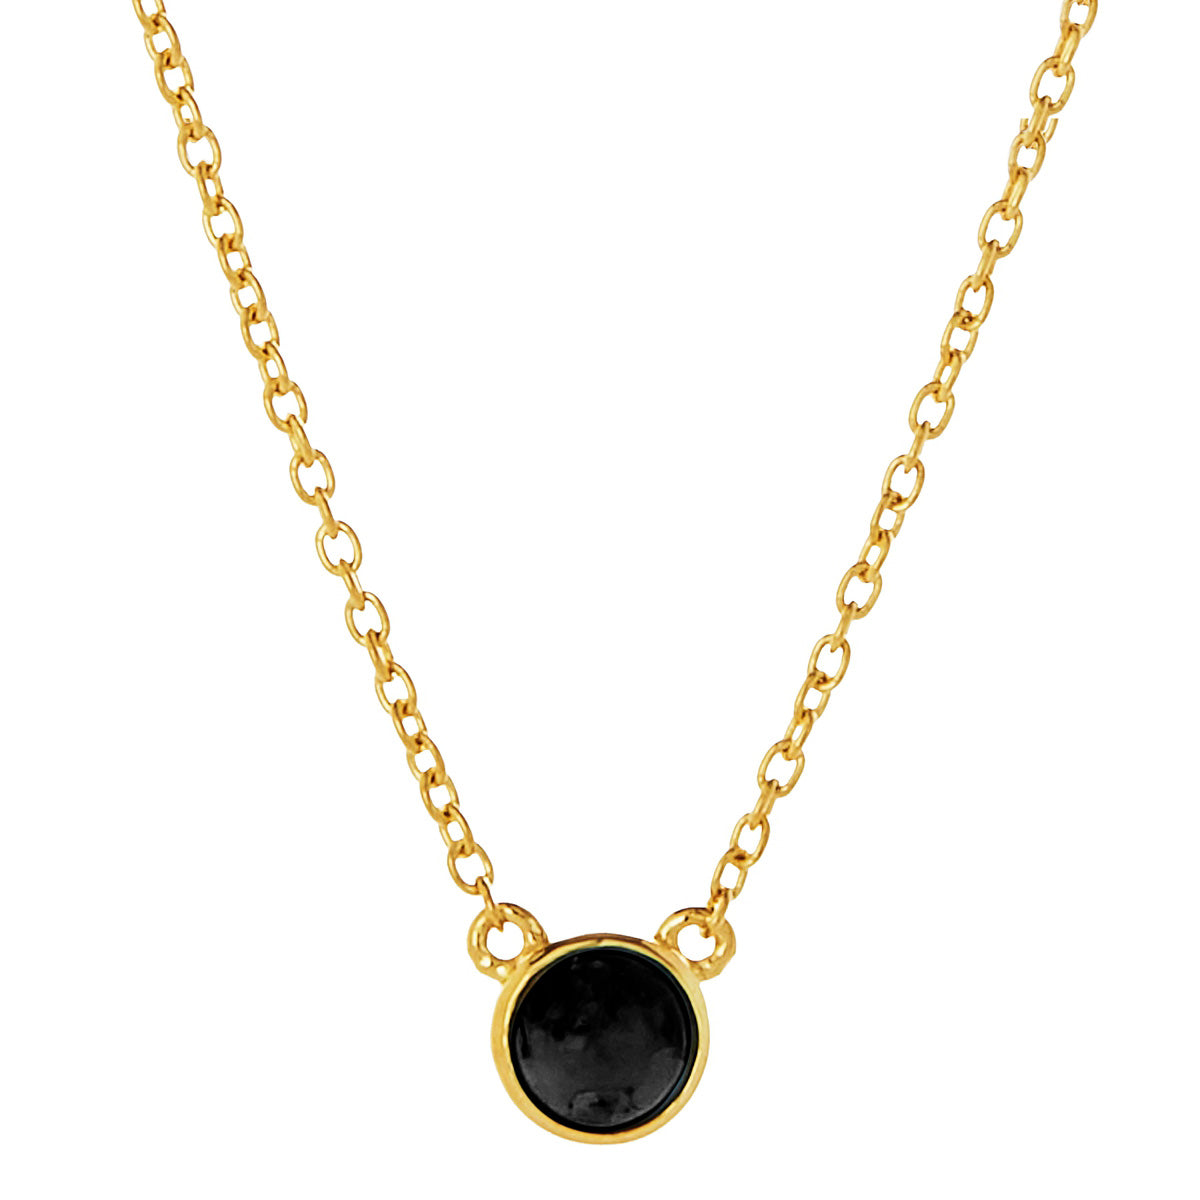 Heavenly Onyx Necklace